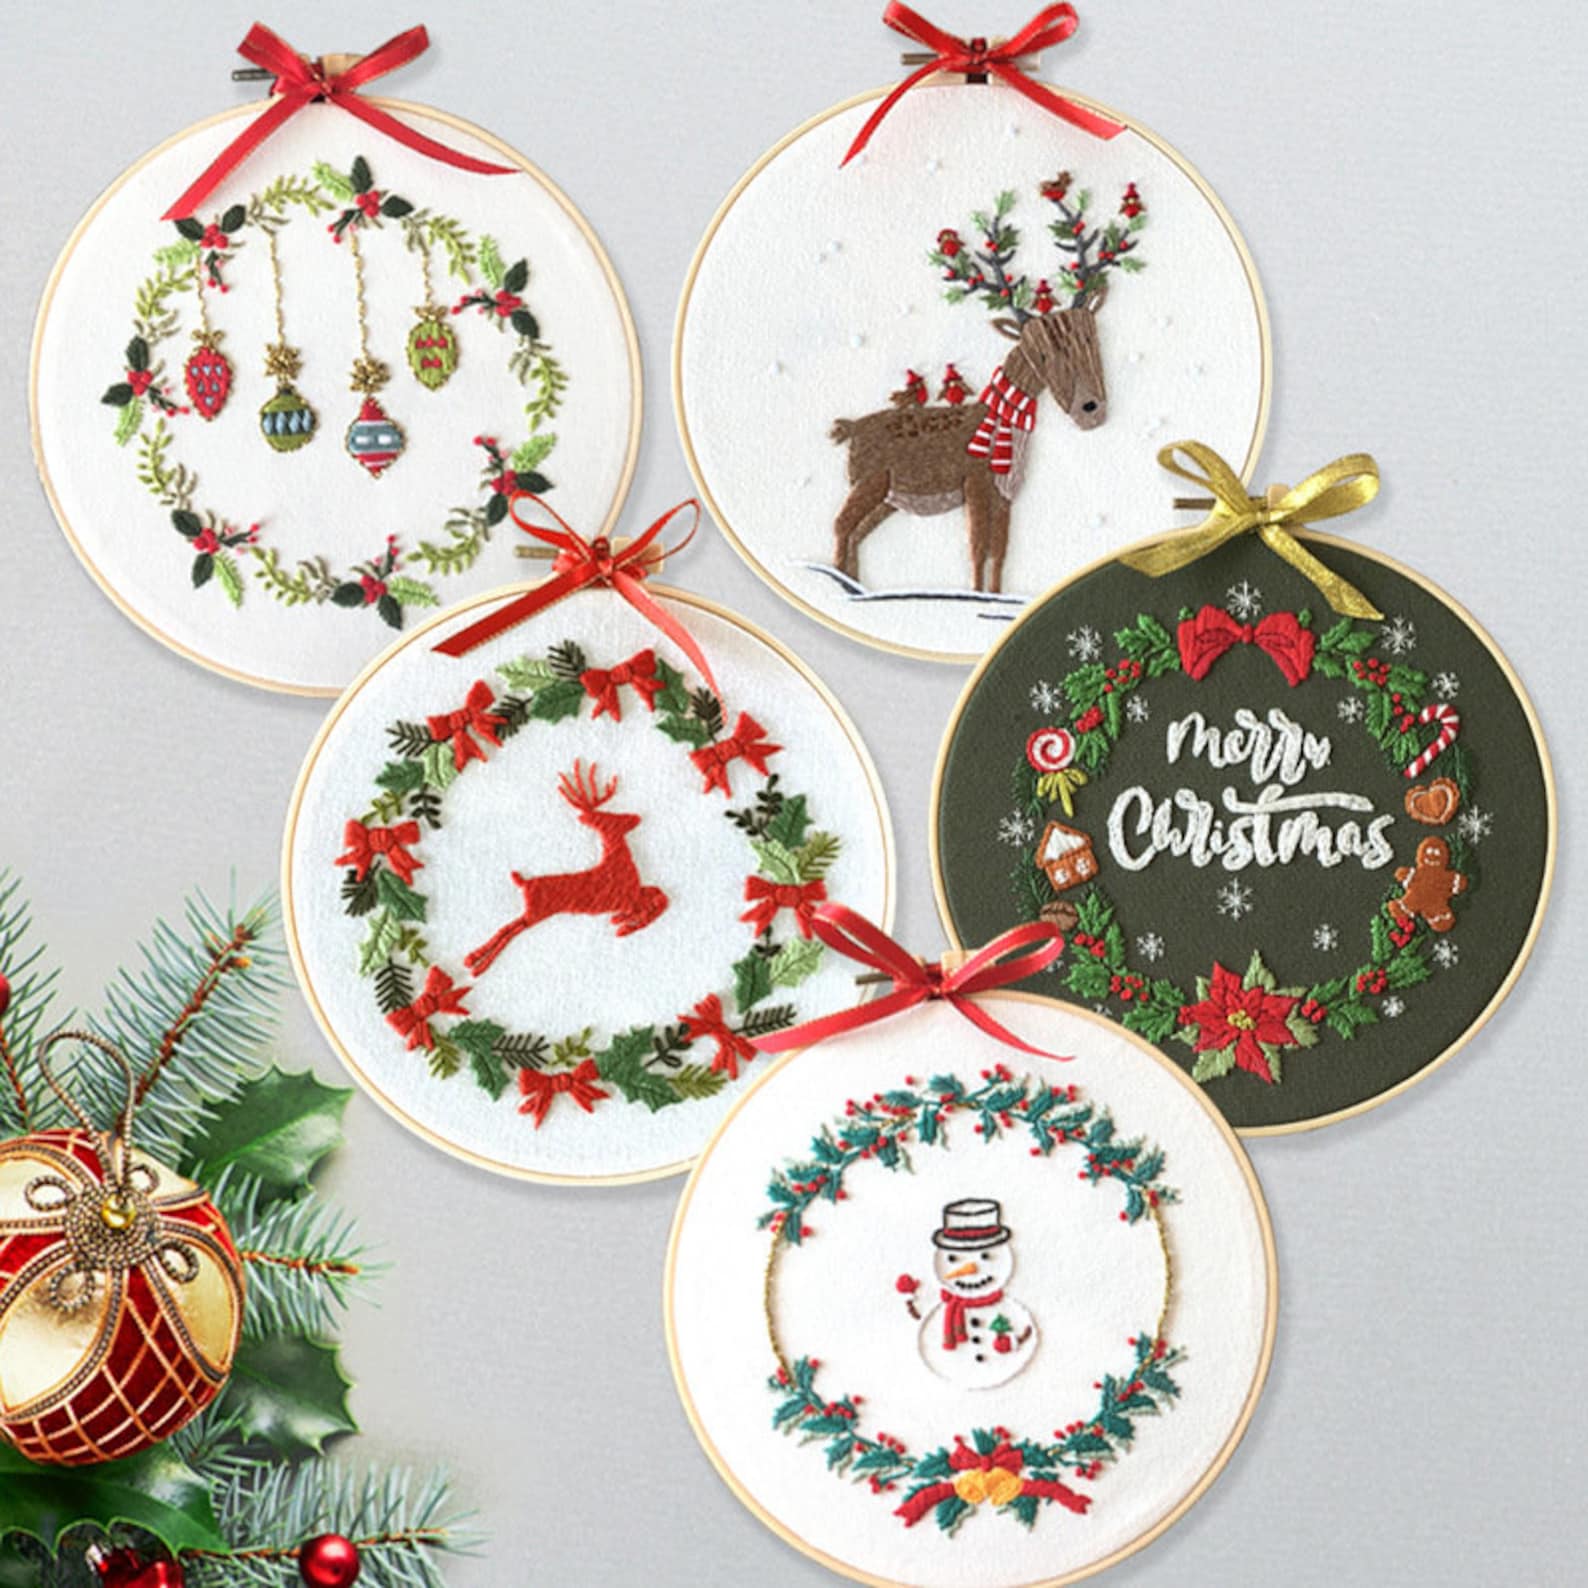 Merry Christmas Embroidery Kit for Beginners Modernhand - Etsy